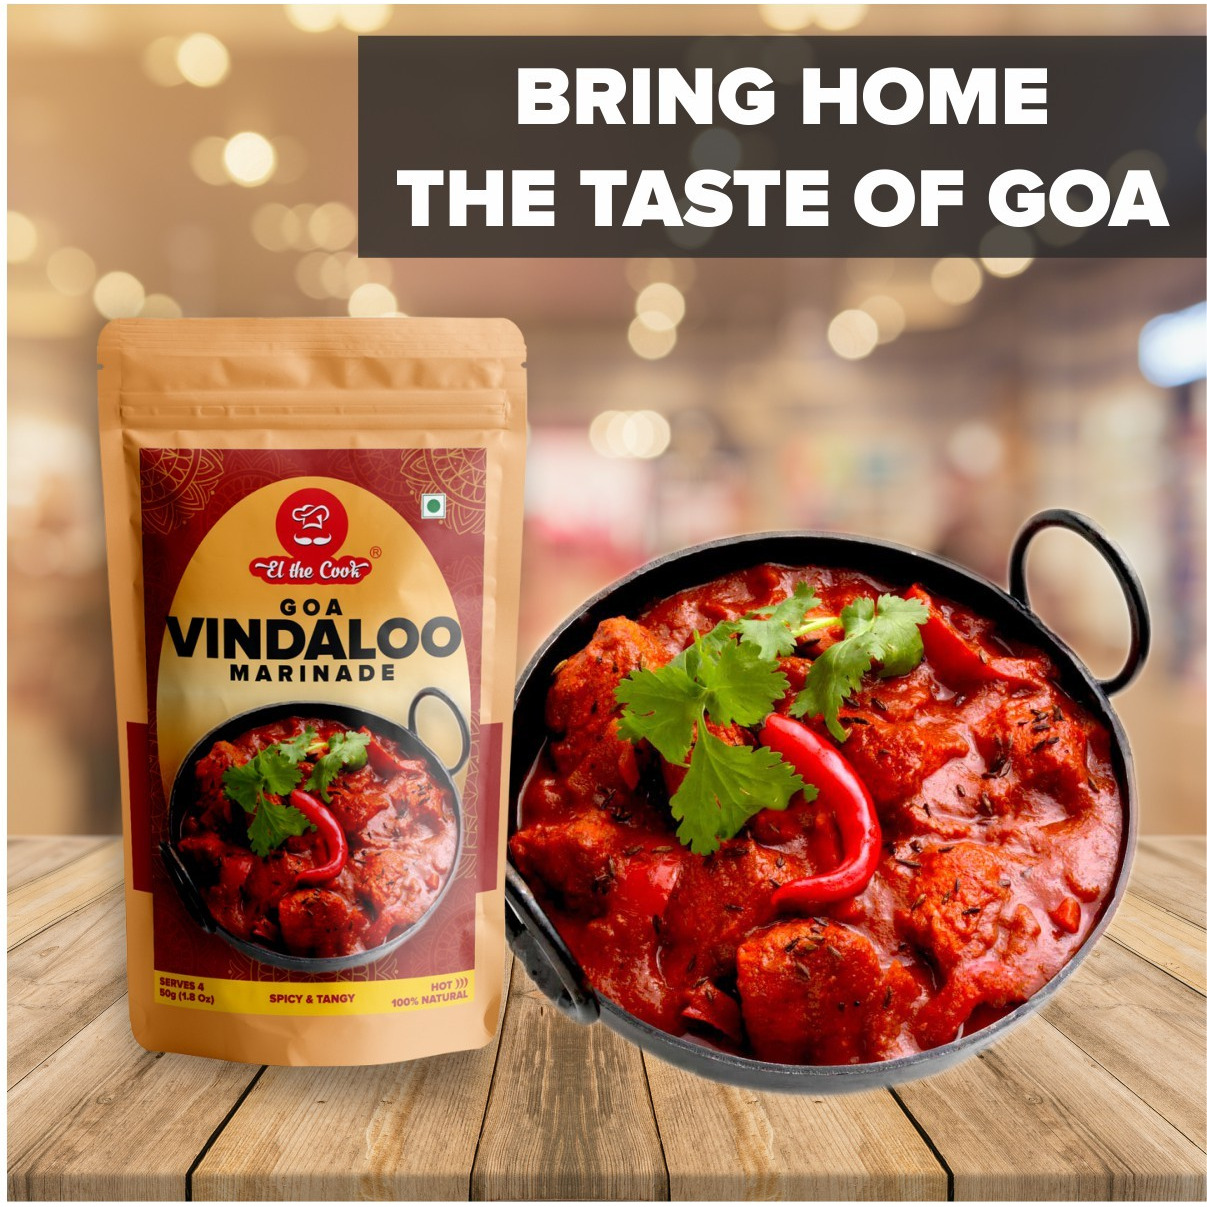 El The Cook Goa Vindaloo Marinade CONCENTRATE, Spicy & Tangy Indian Meat Marinade, 3 pack x 1.7oz, Vegetarian, Gluten Free (Flavor: Vindaloo Marinade - 3 Pack)